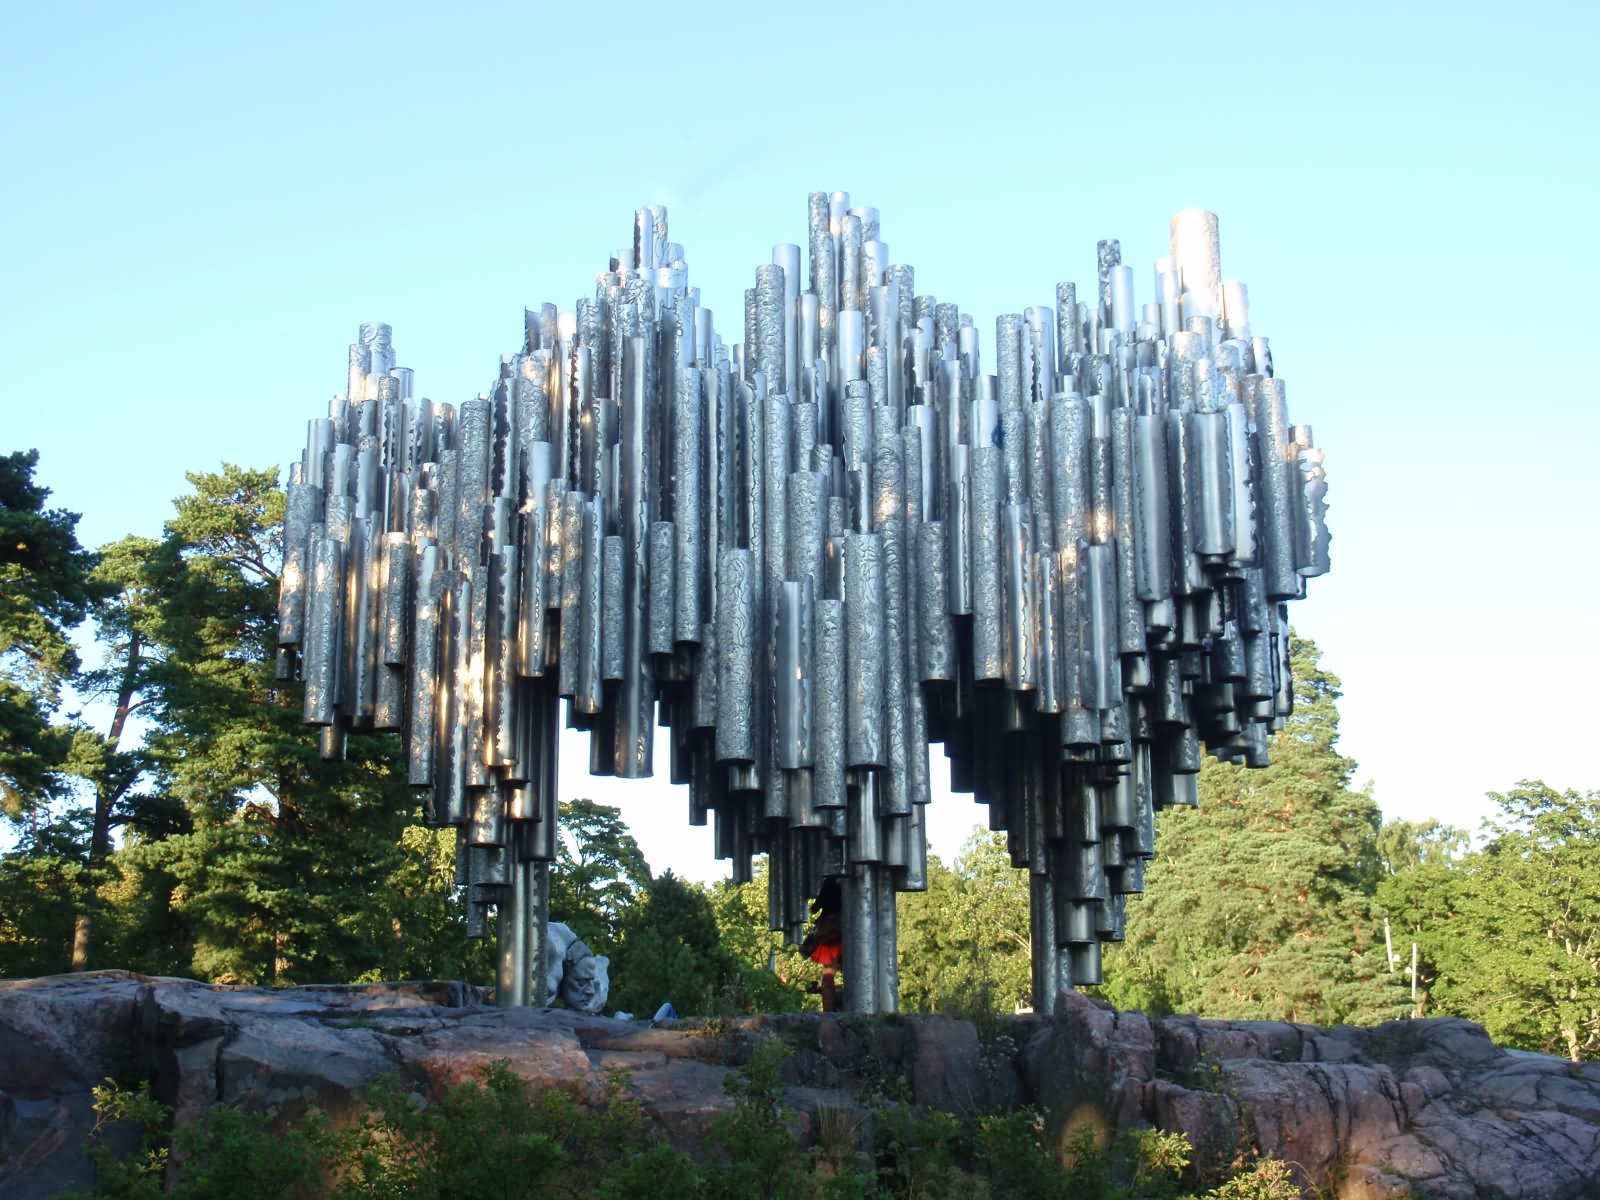 20 Adorable Pictures Of The Sibelius Monument In Finland